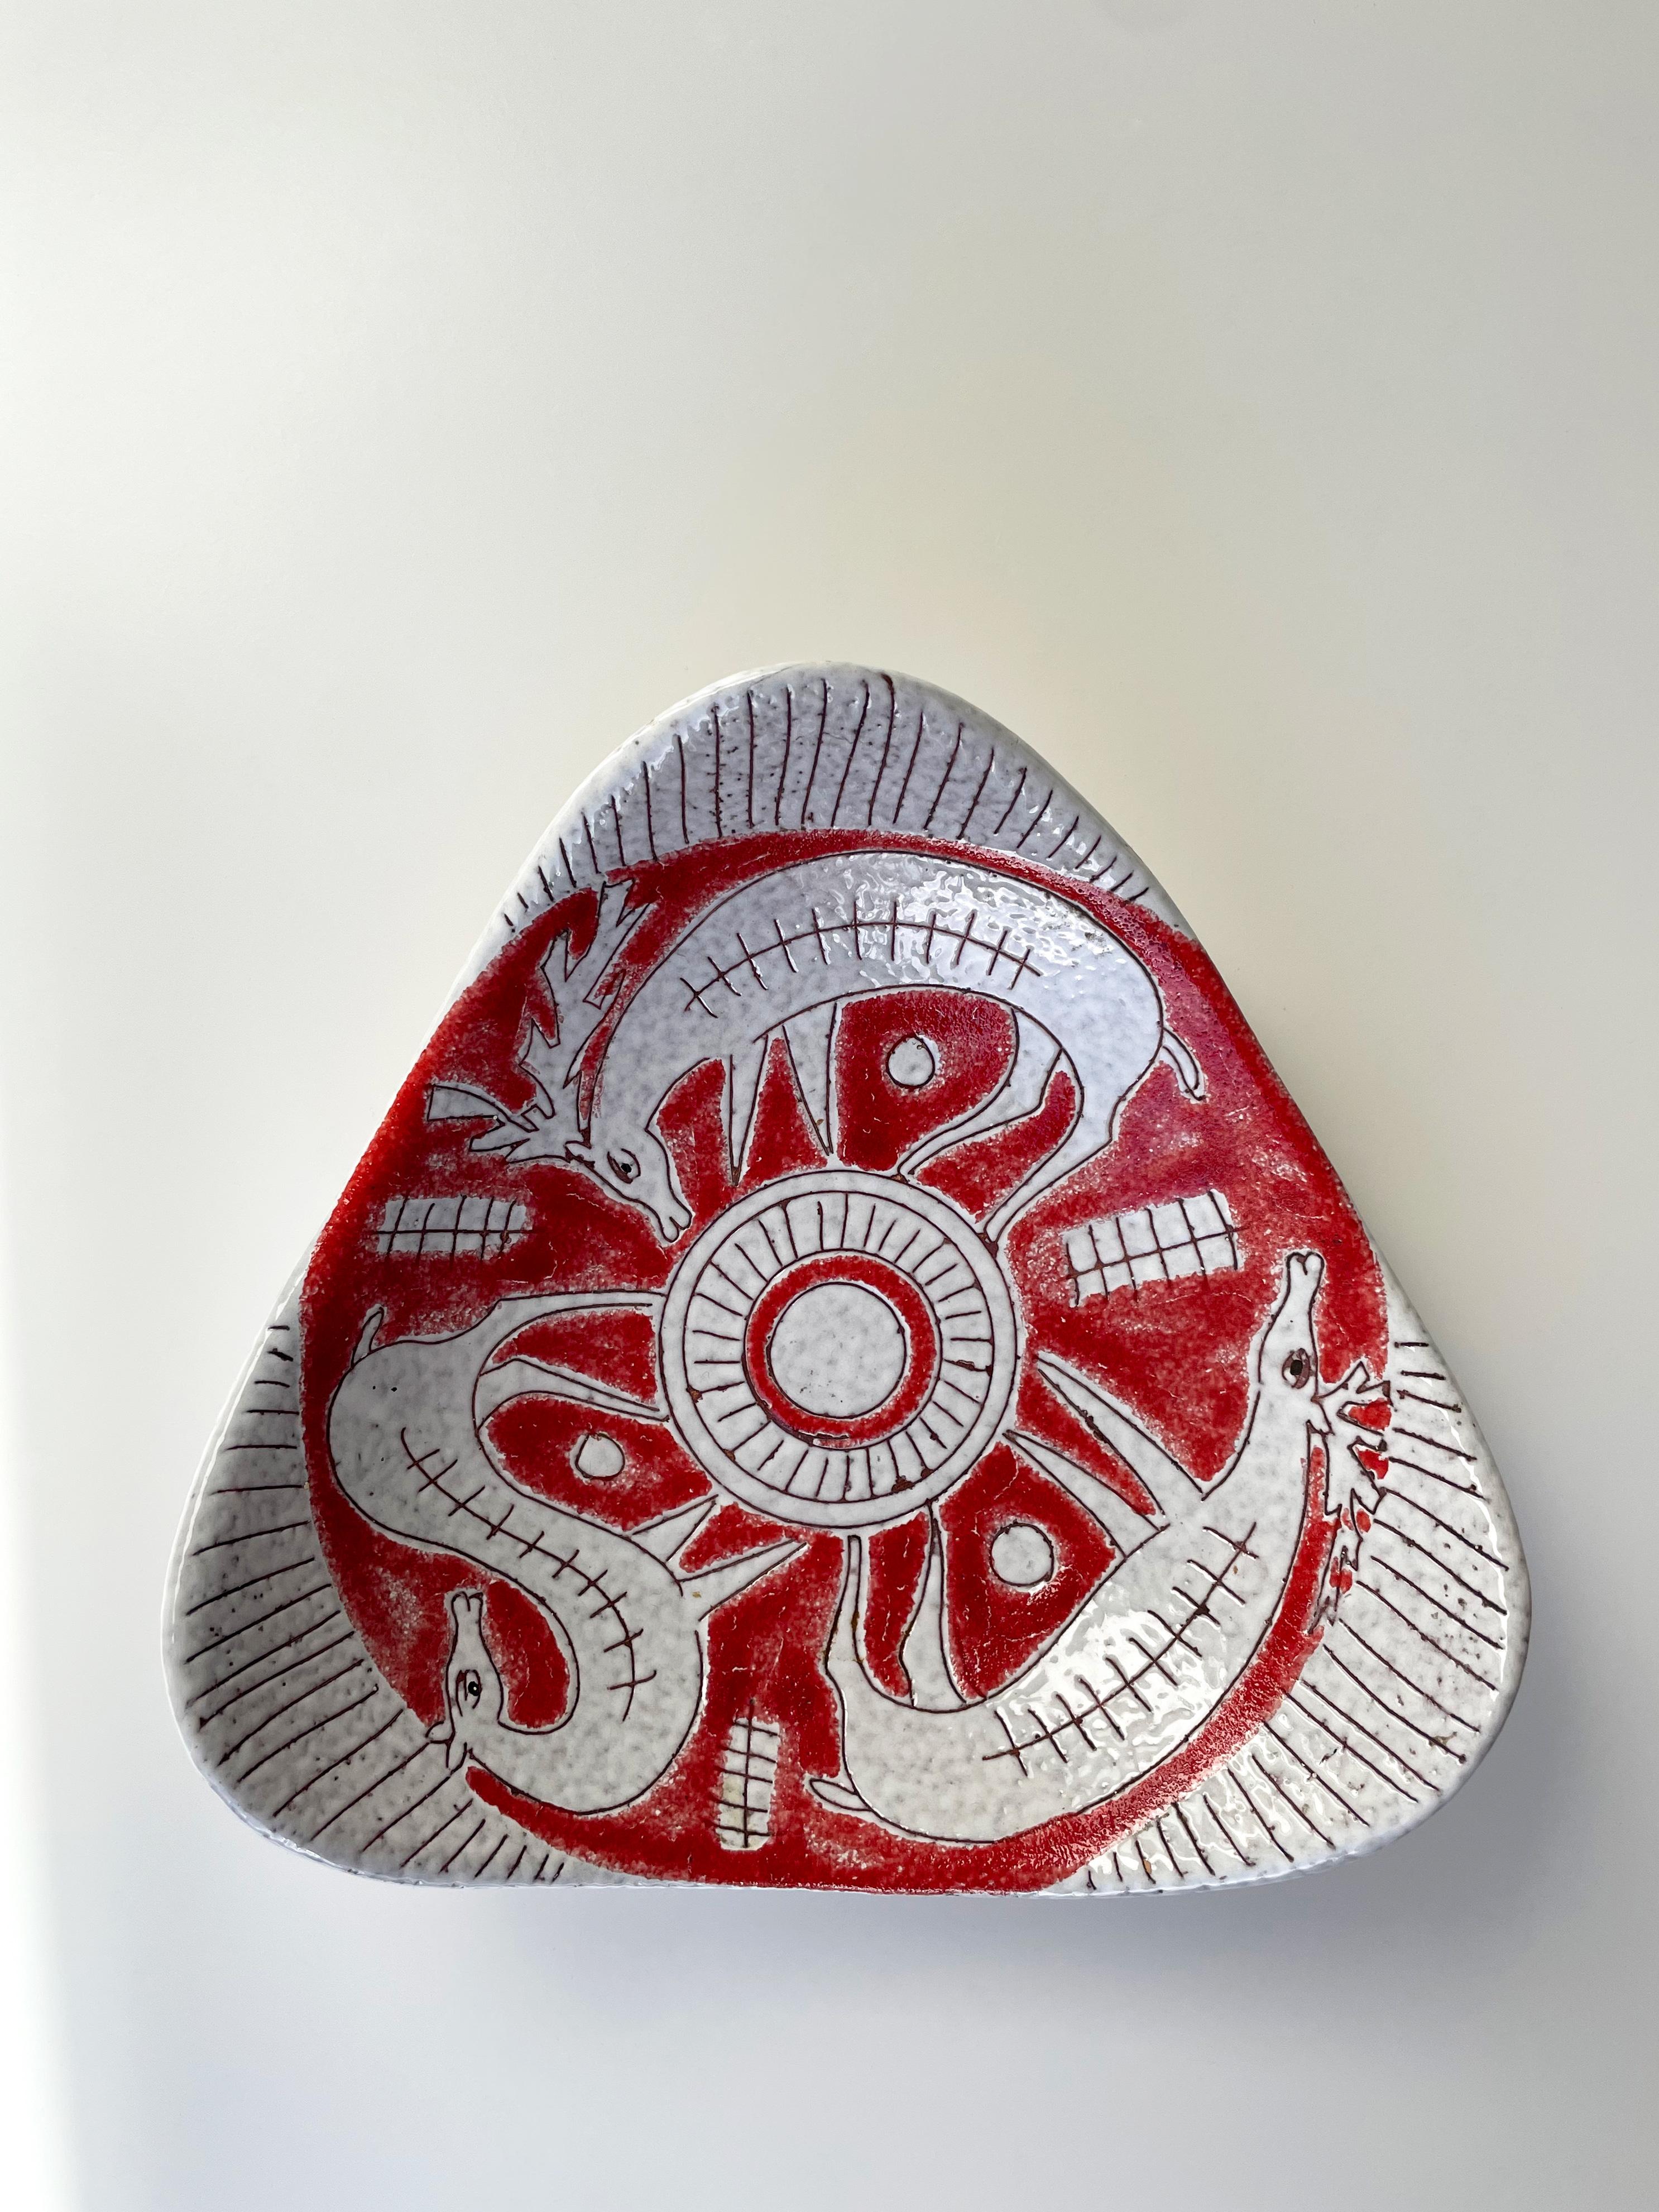 Vintage Italian modernist soft shaped triangular decorative bowl / wall plate by Fratelli Fancuillacci, late 1950s-early 1960s. Three stylized deer on each side of this piece glazed in chalk white and scarlet red. Hand-carved sgraffito technique